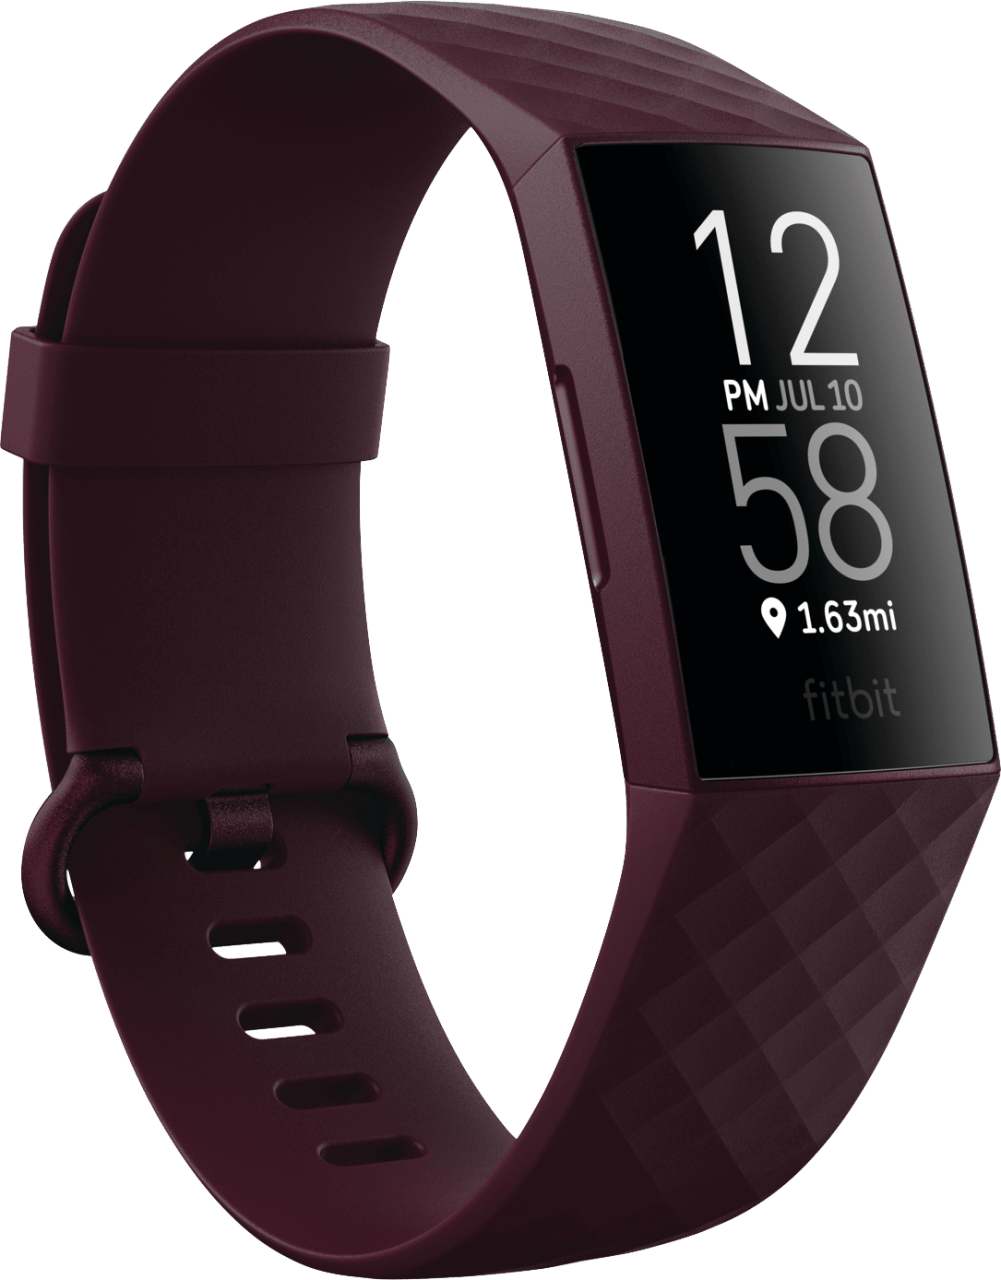 Palissander Fitbit Charge 4 Activity Tracker.3